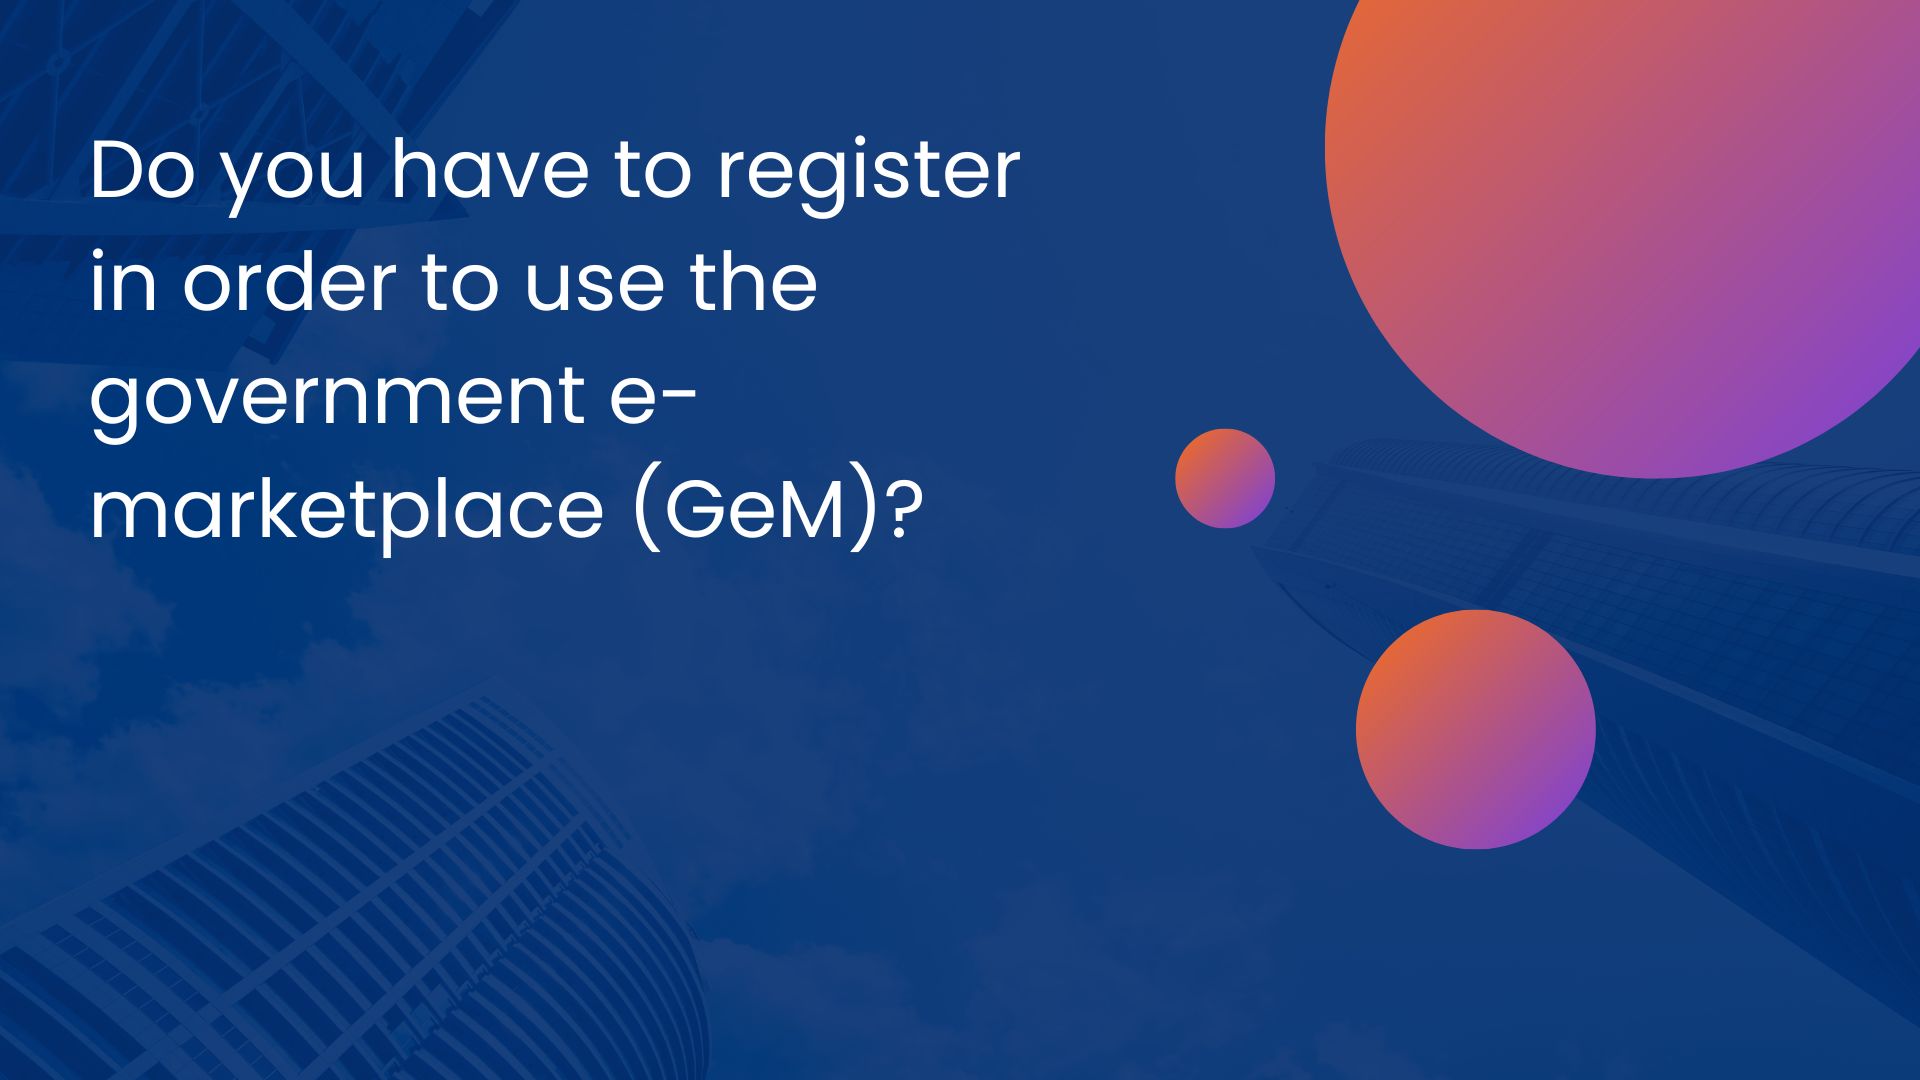 Do you have to register in order to use the government e-marketplace (GeM)?